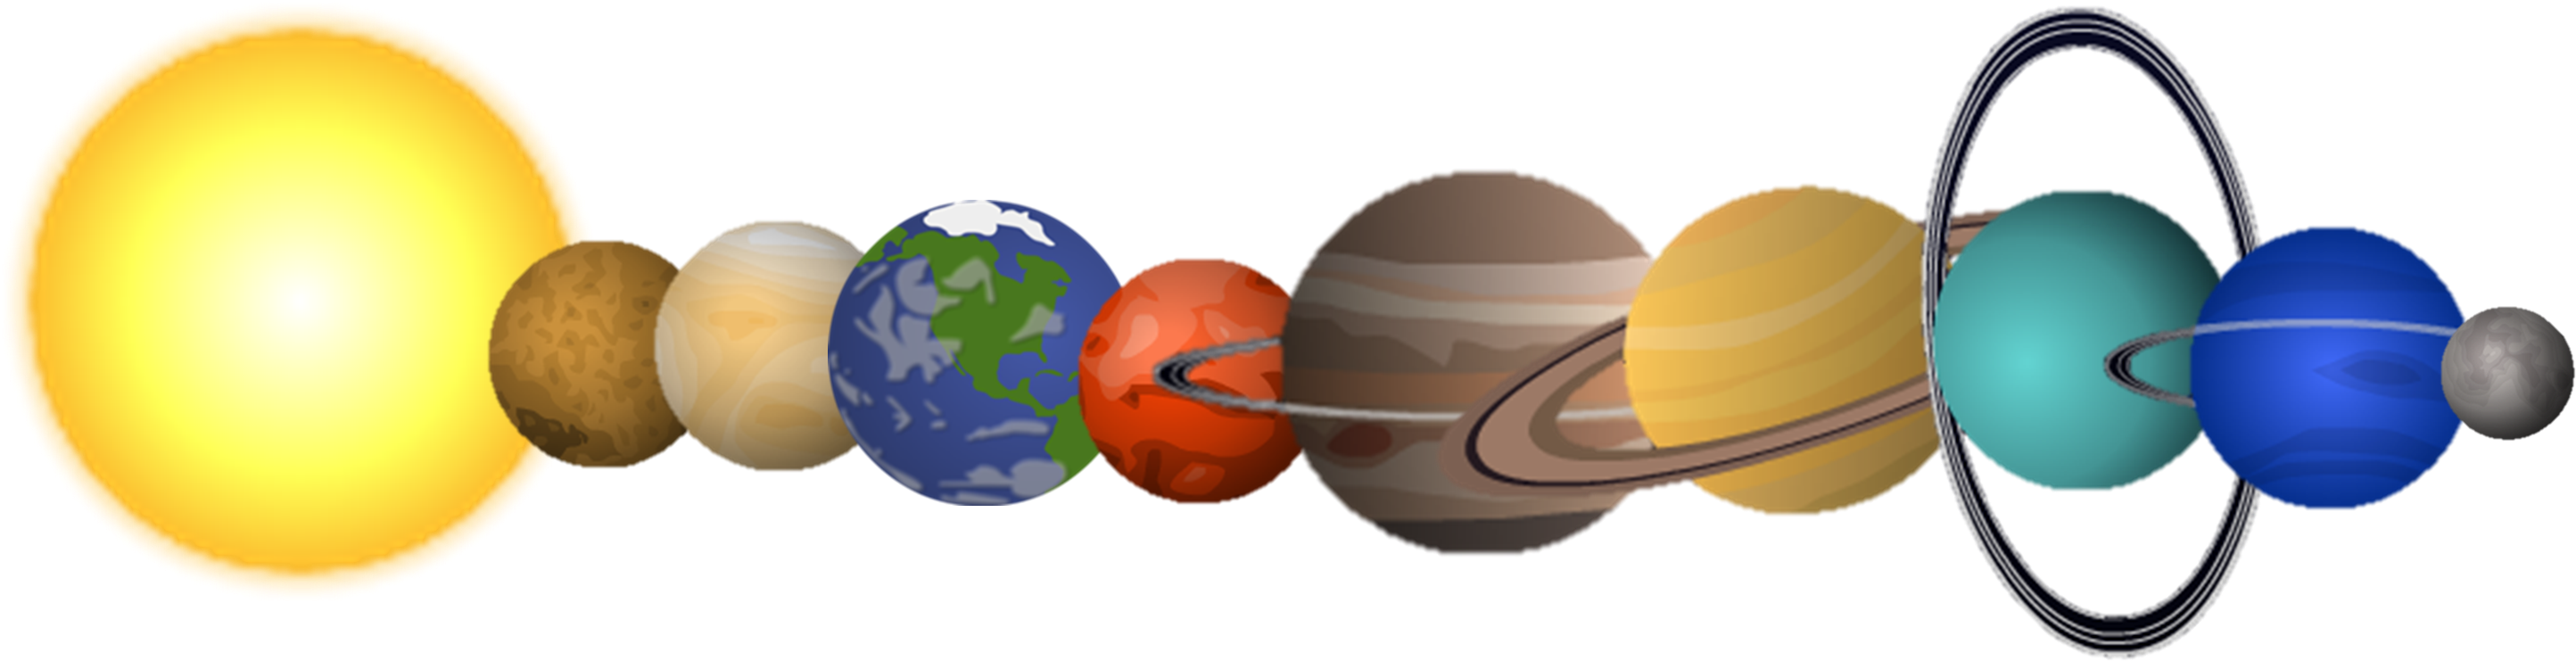 Fun &amp - Interactive - Solar System Images Png (2910x750)